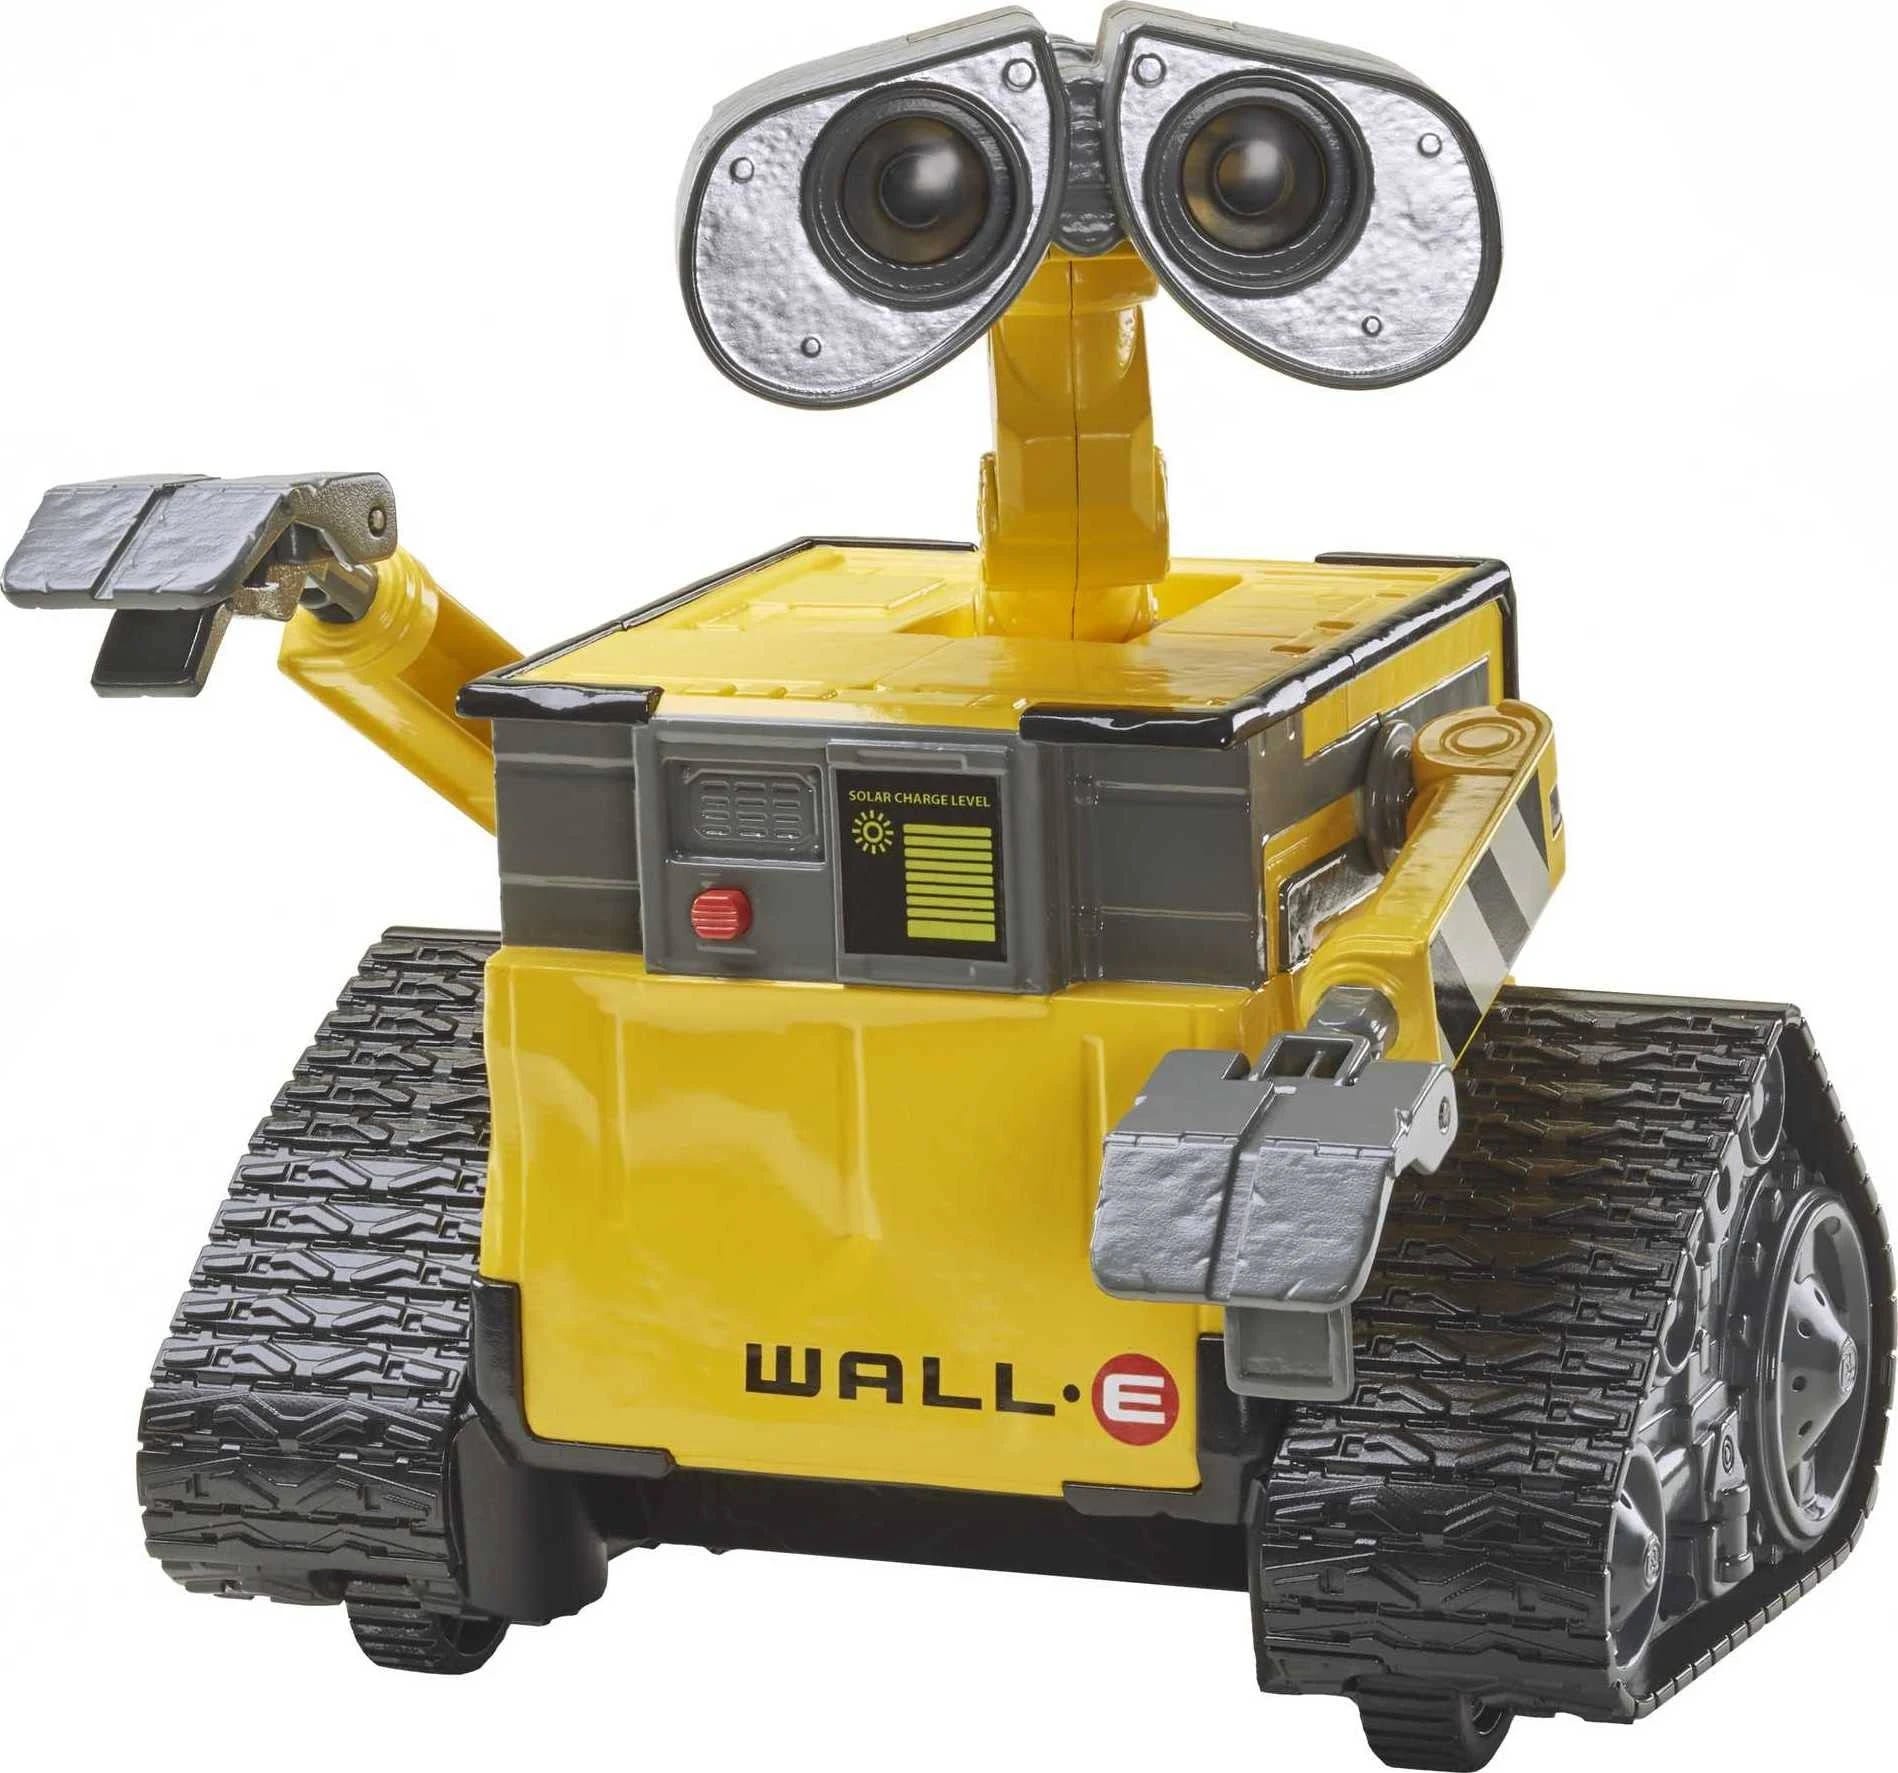 Disney Pixar Wall-E Remote Control Robot Toy - RC Wall-E with 20 Light and Sound Combinations | Image